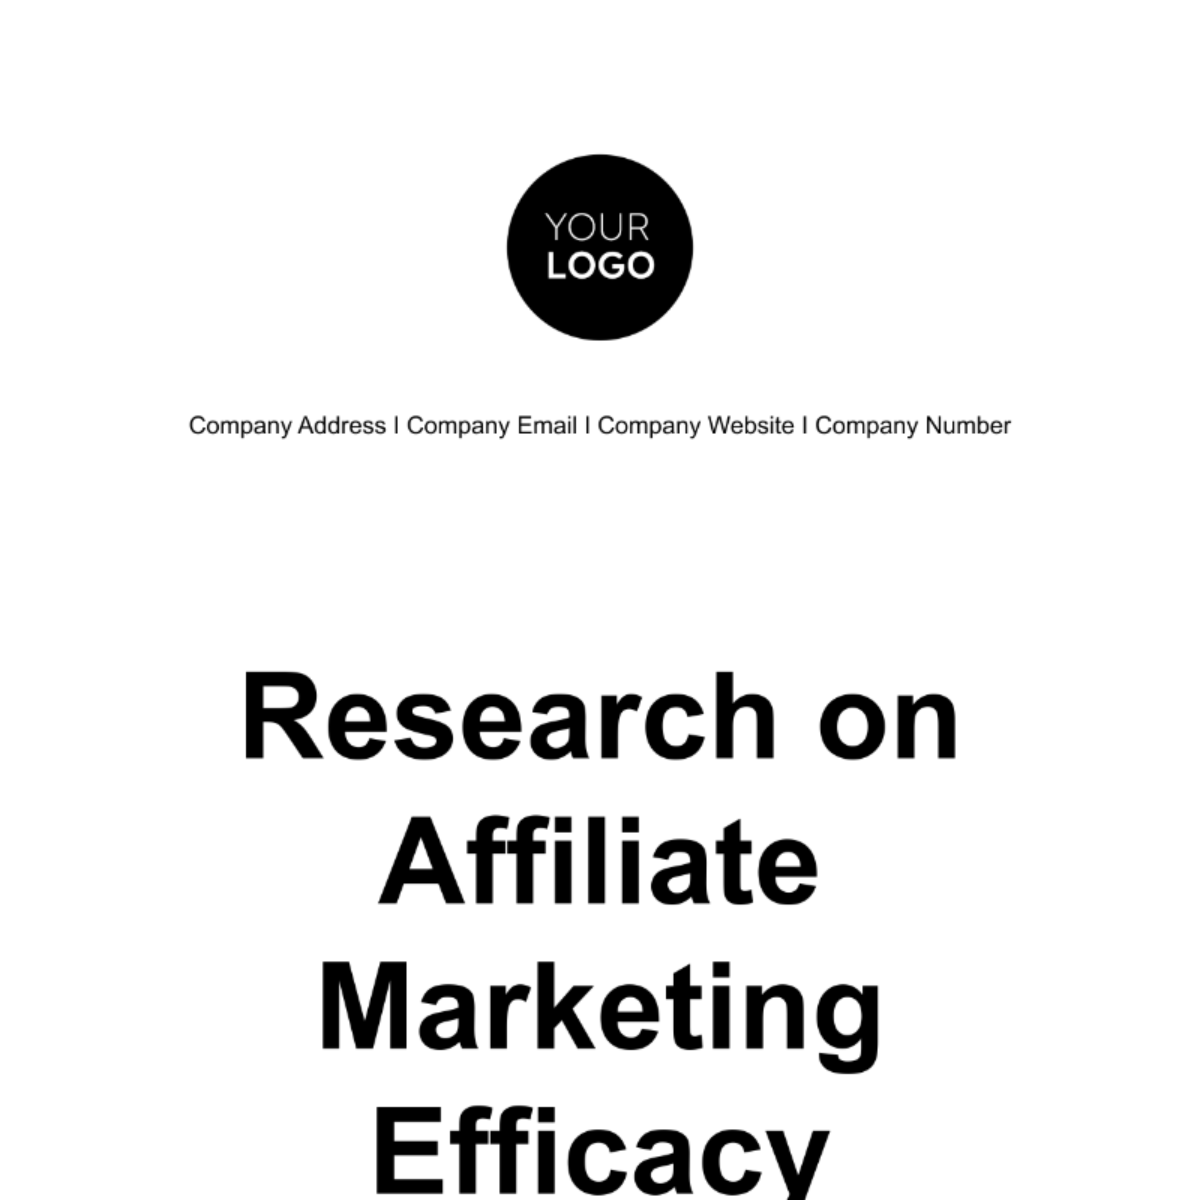 Research on Affiliate Marketing Efficacy Template